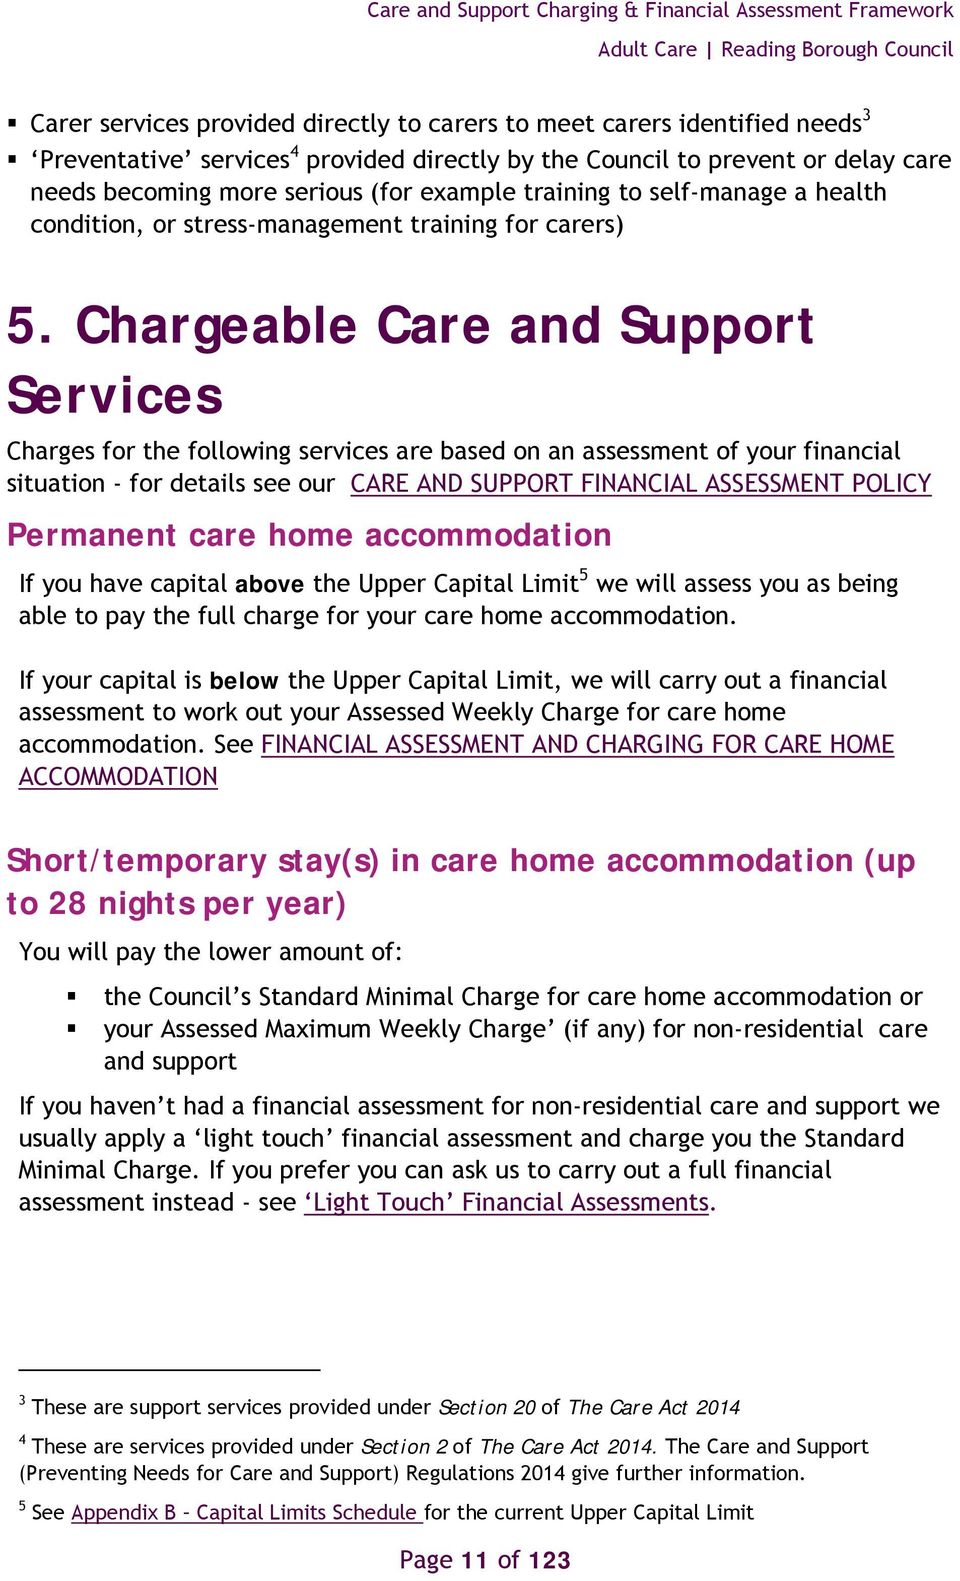 Chargeable Care and Support Services Charges for the following services are based on an assessment of your financial situation - for details see our CARE AND SUPPORT FINANCIAL ASSESSMENT POLICY